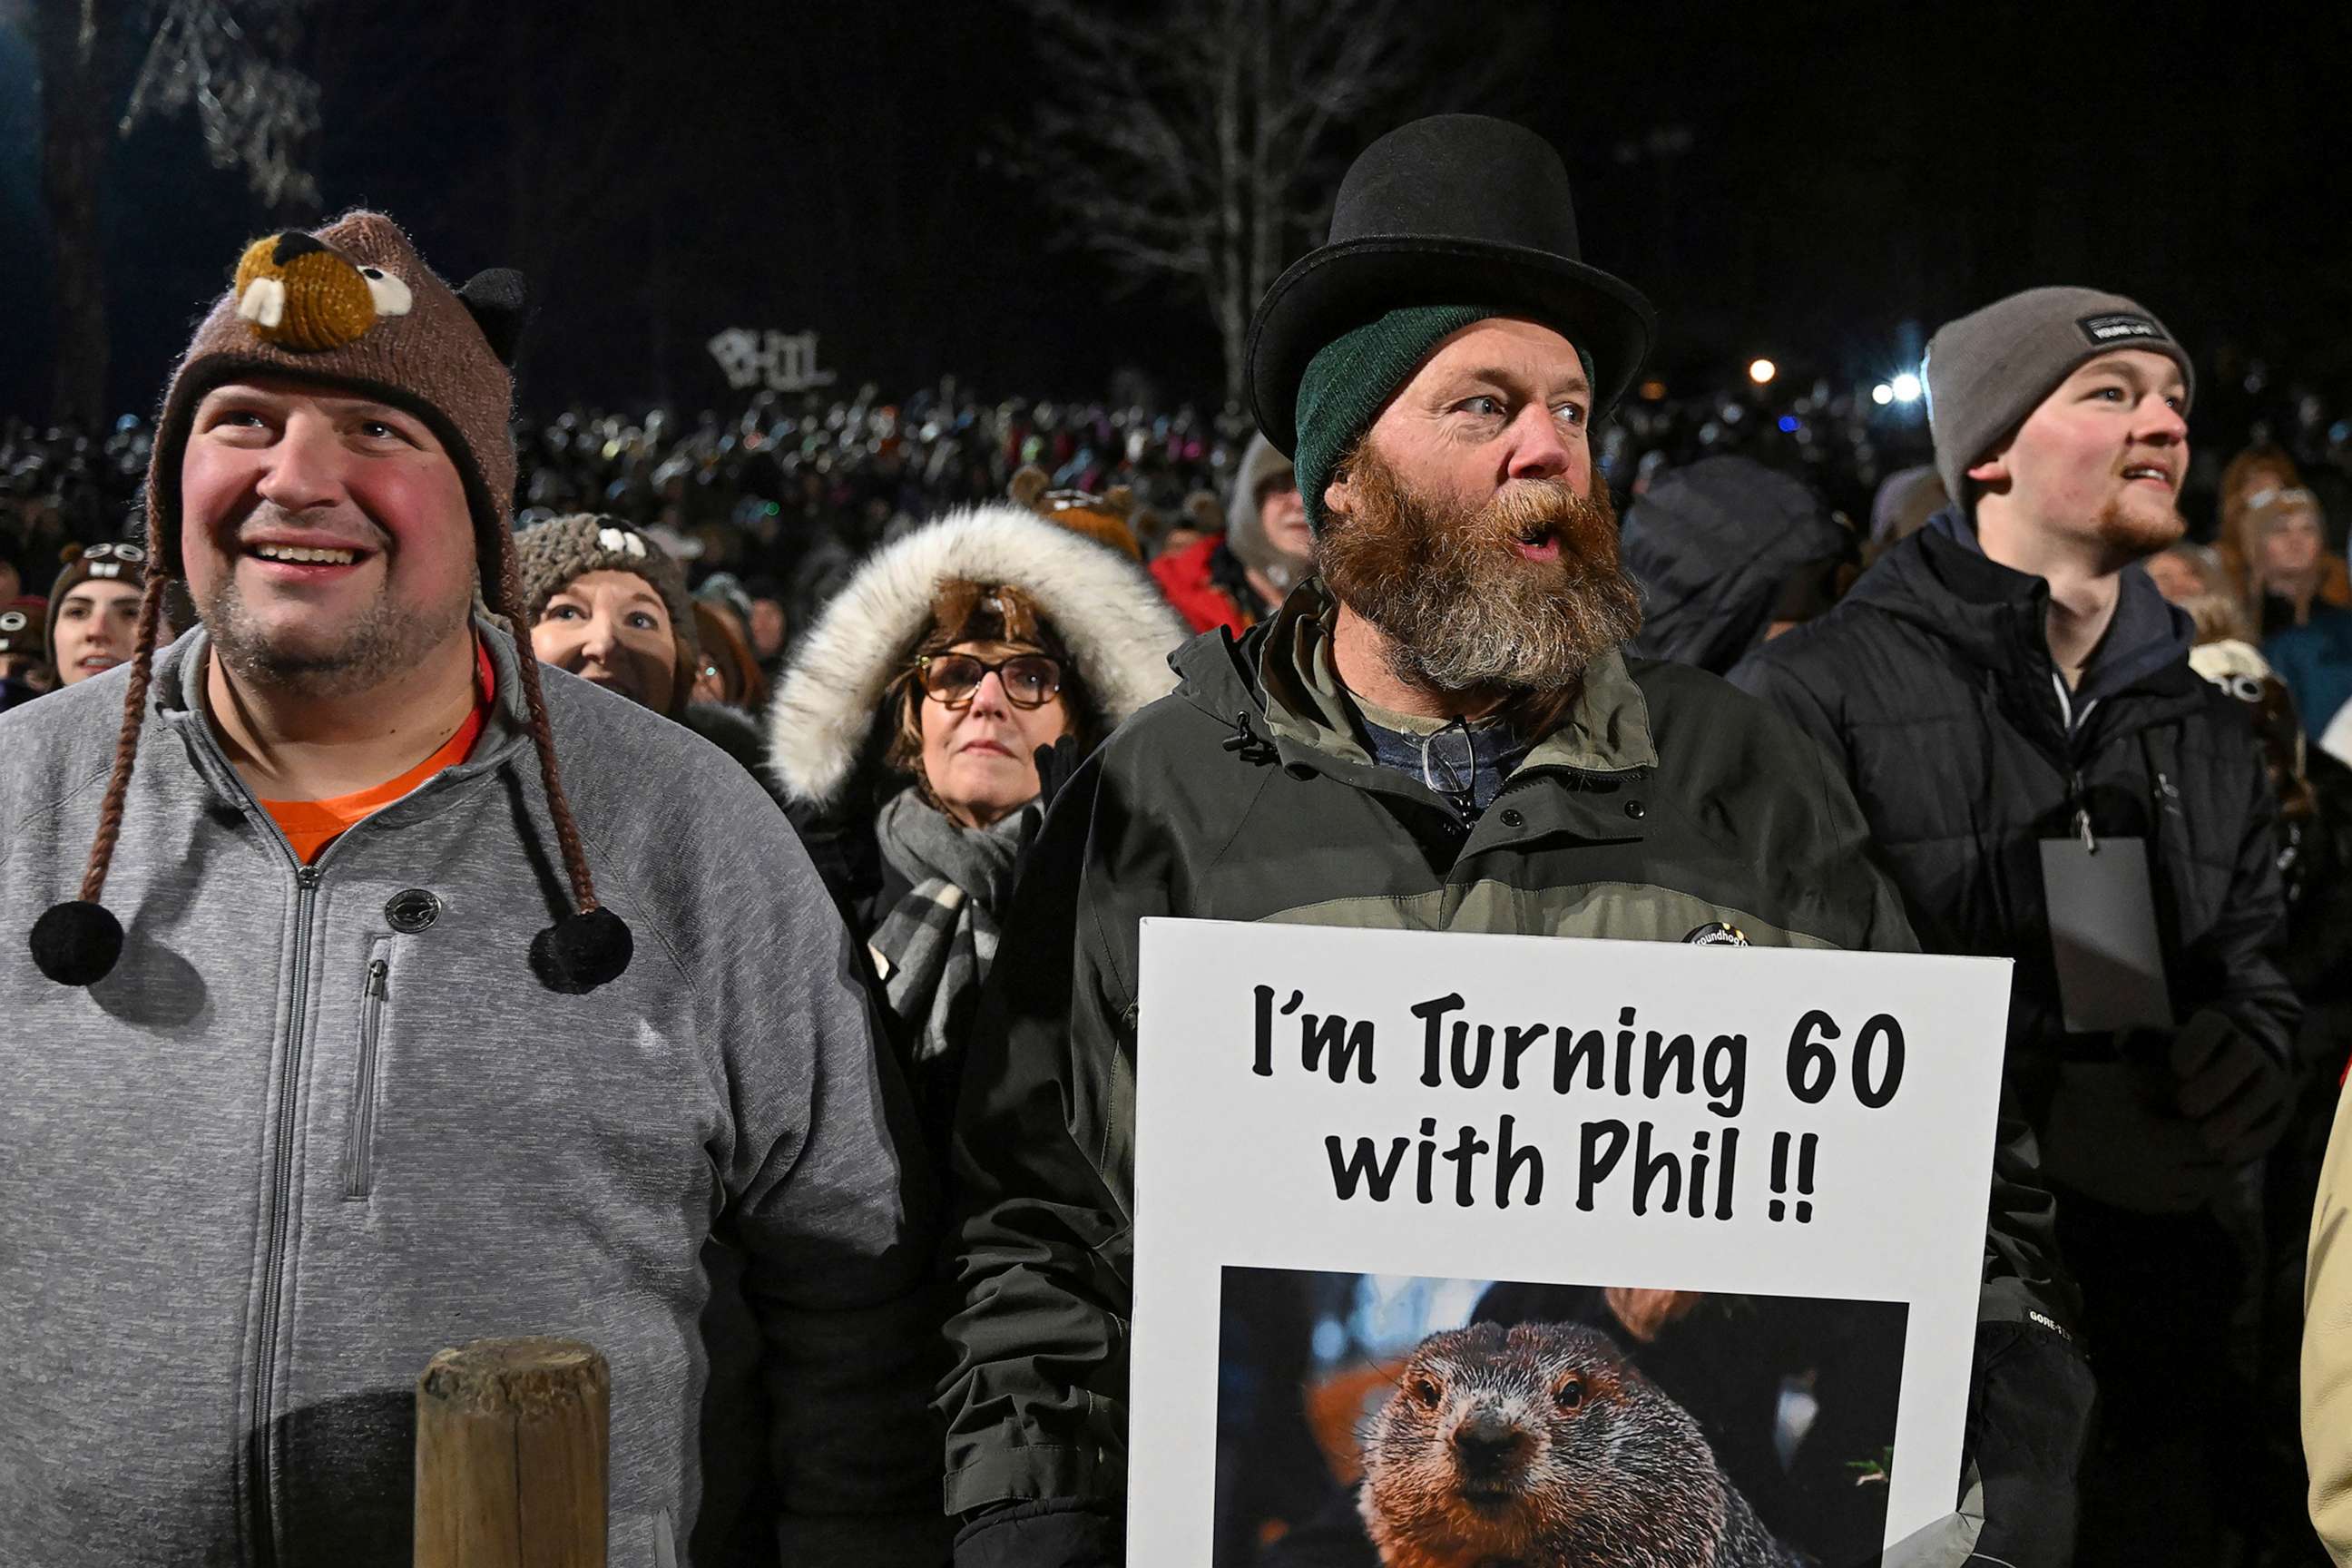 PHOTO: People watch the festivities while waiting for Punxsutawney Phil to come out and make his prediction during the the 137th celebration of Groundhog Day on Gobbler's Knob in Punxsutawney, Pa., Thursday, Feb. 2, 2023.